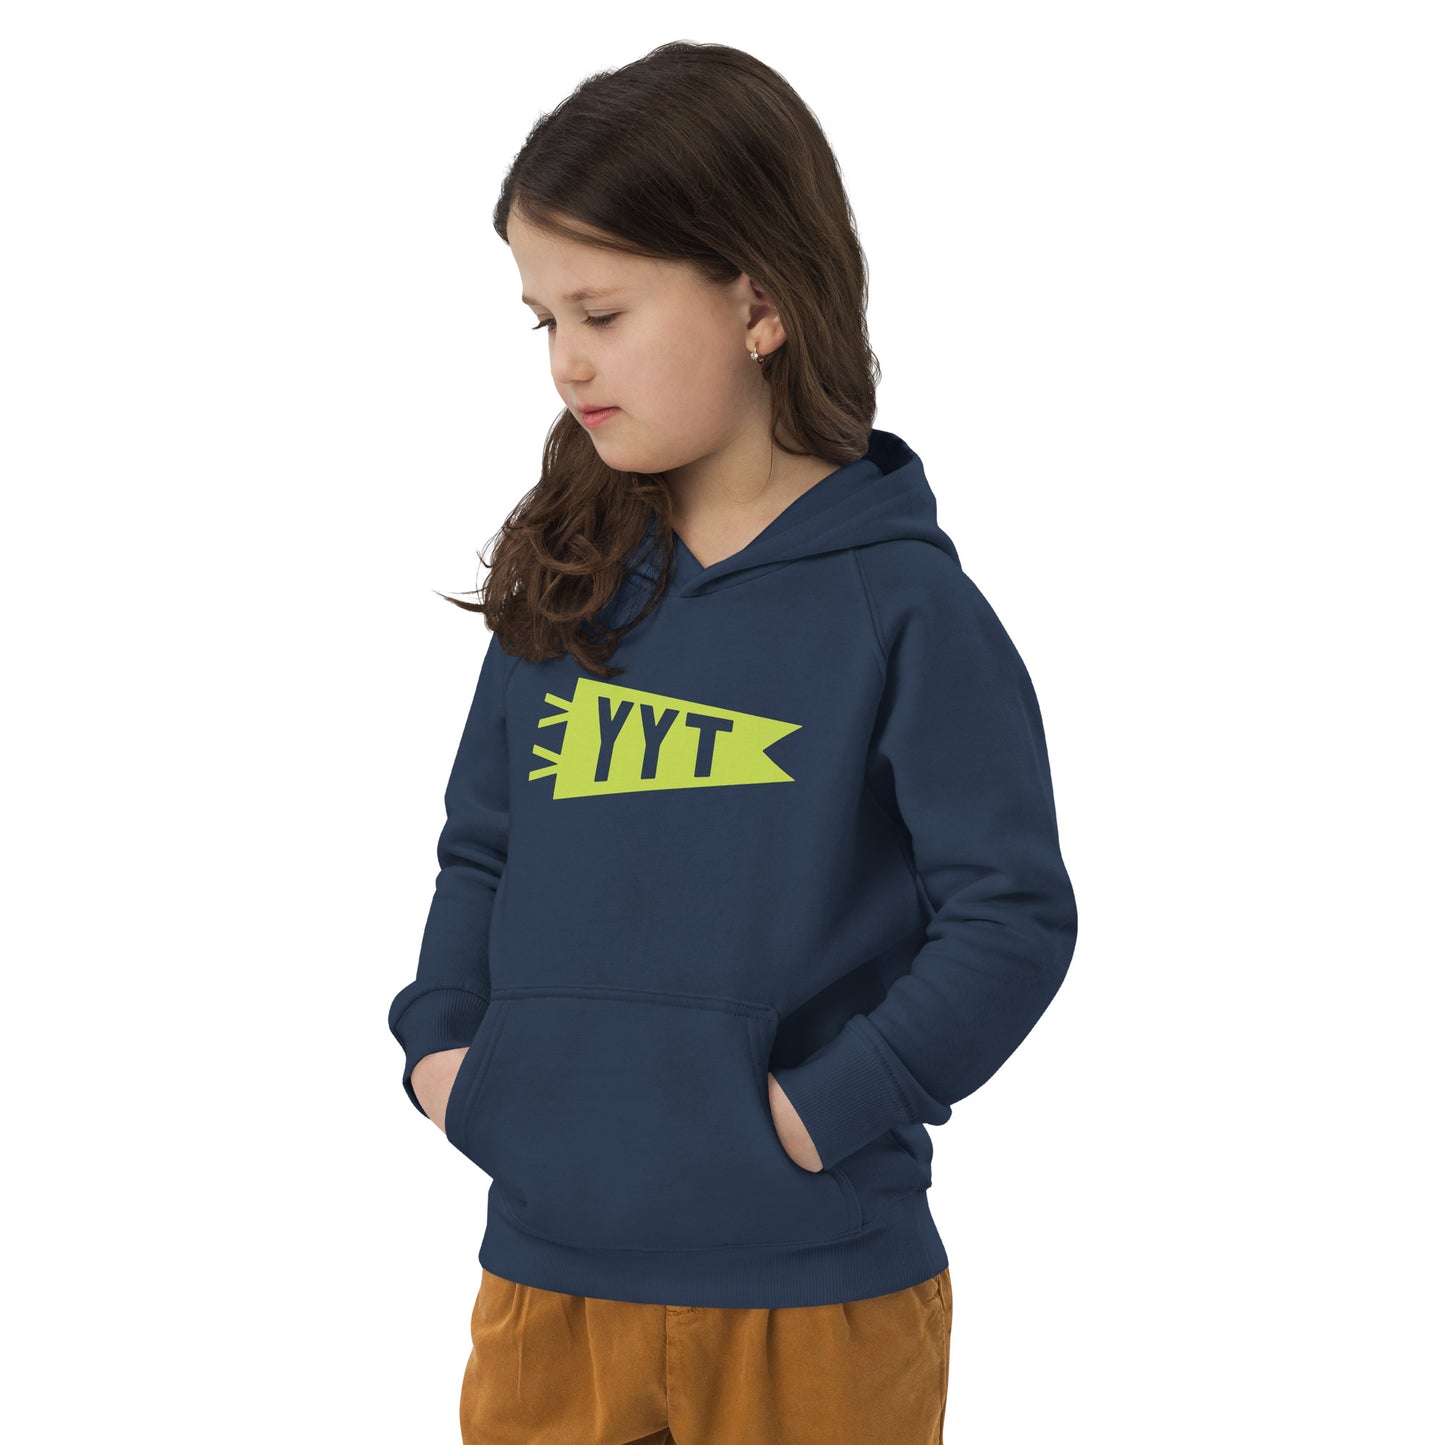 Kid's Sustainable Hoodie - Green Graphic • YYT St. John's • YHM Designs - Image 05